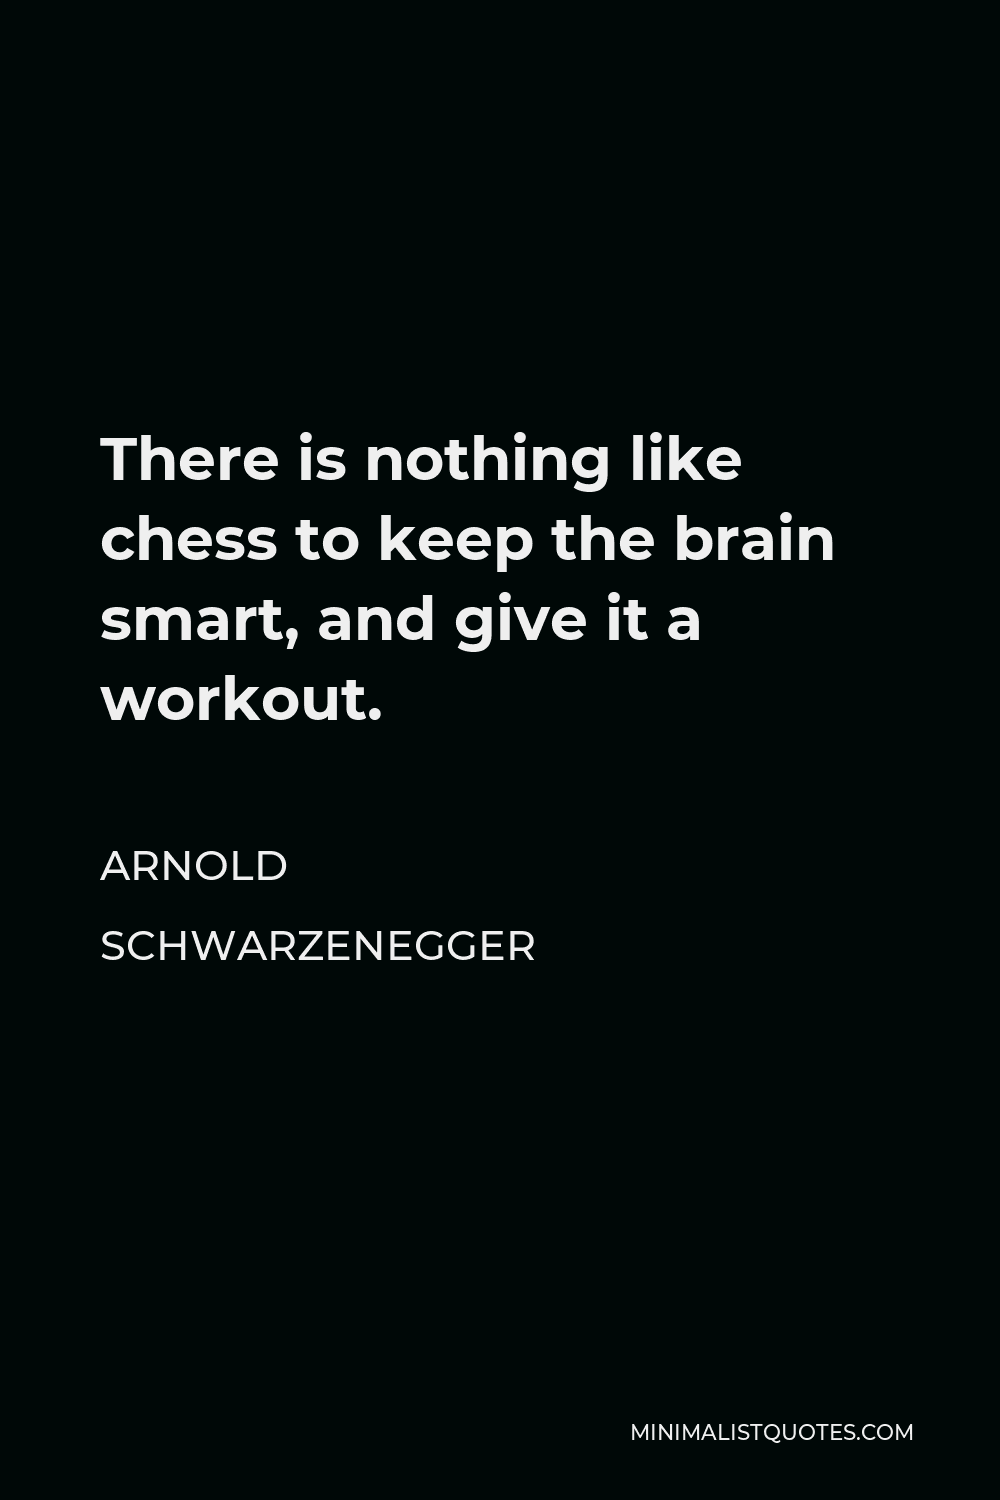 Arnold Schwarzenegger Quote - There is nothing like chess to keep the brain smart, and give it a workout.